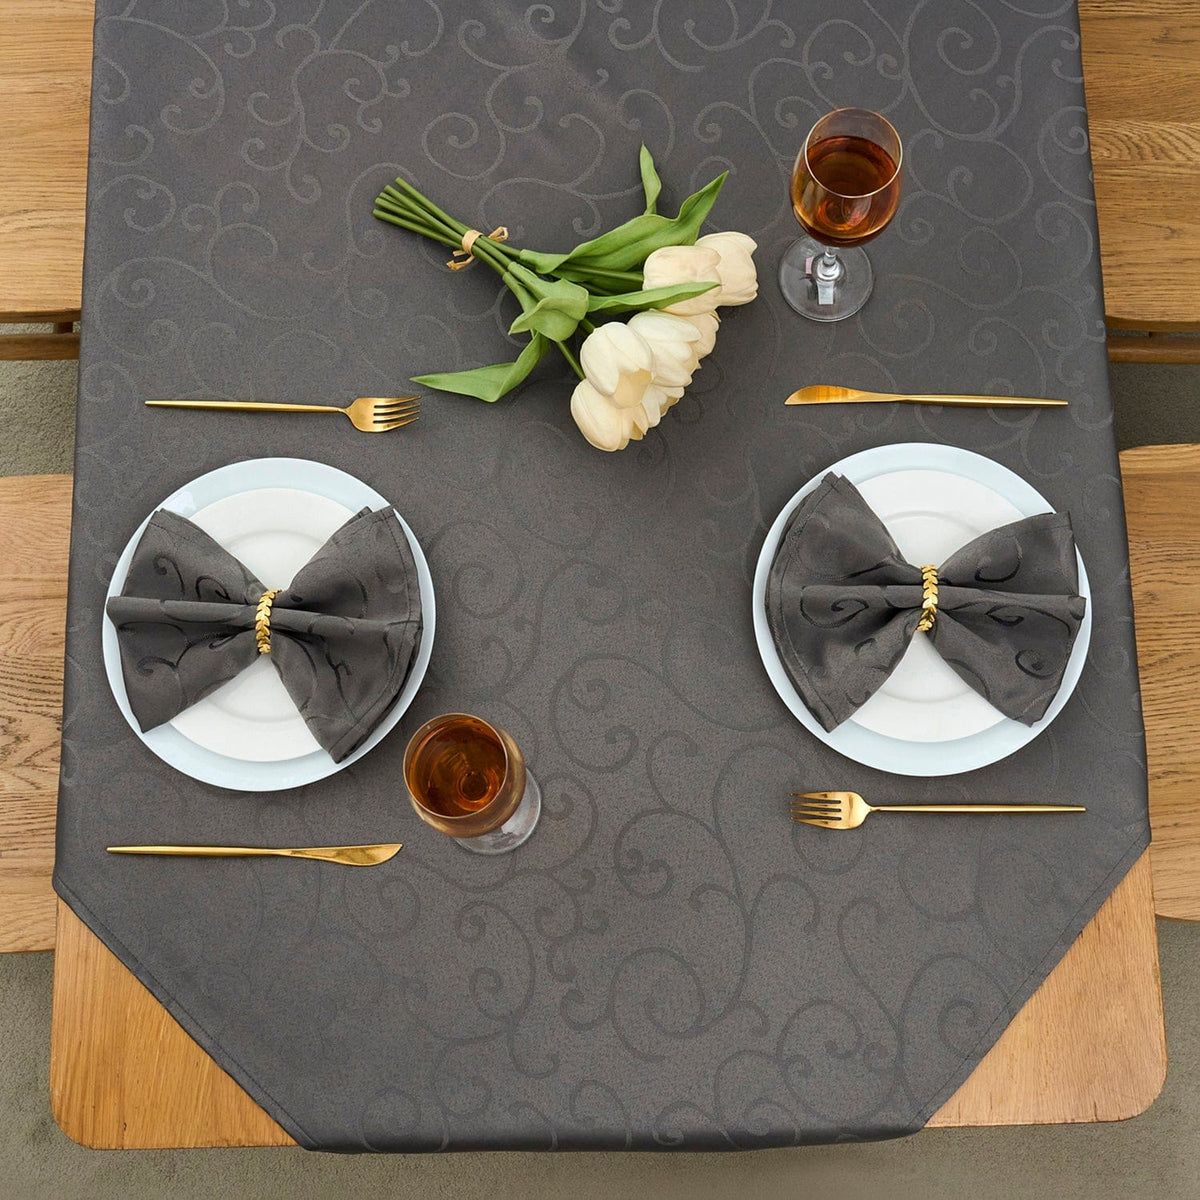 Marina Waterproof Thick Solid Damask Liquid Repellent and Stain Resistant 4 Piece Napkin Set